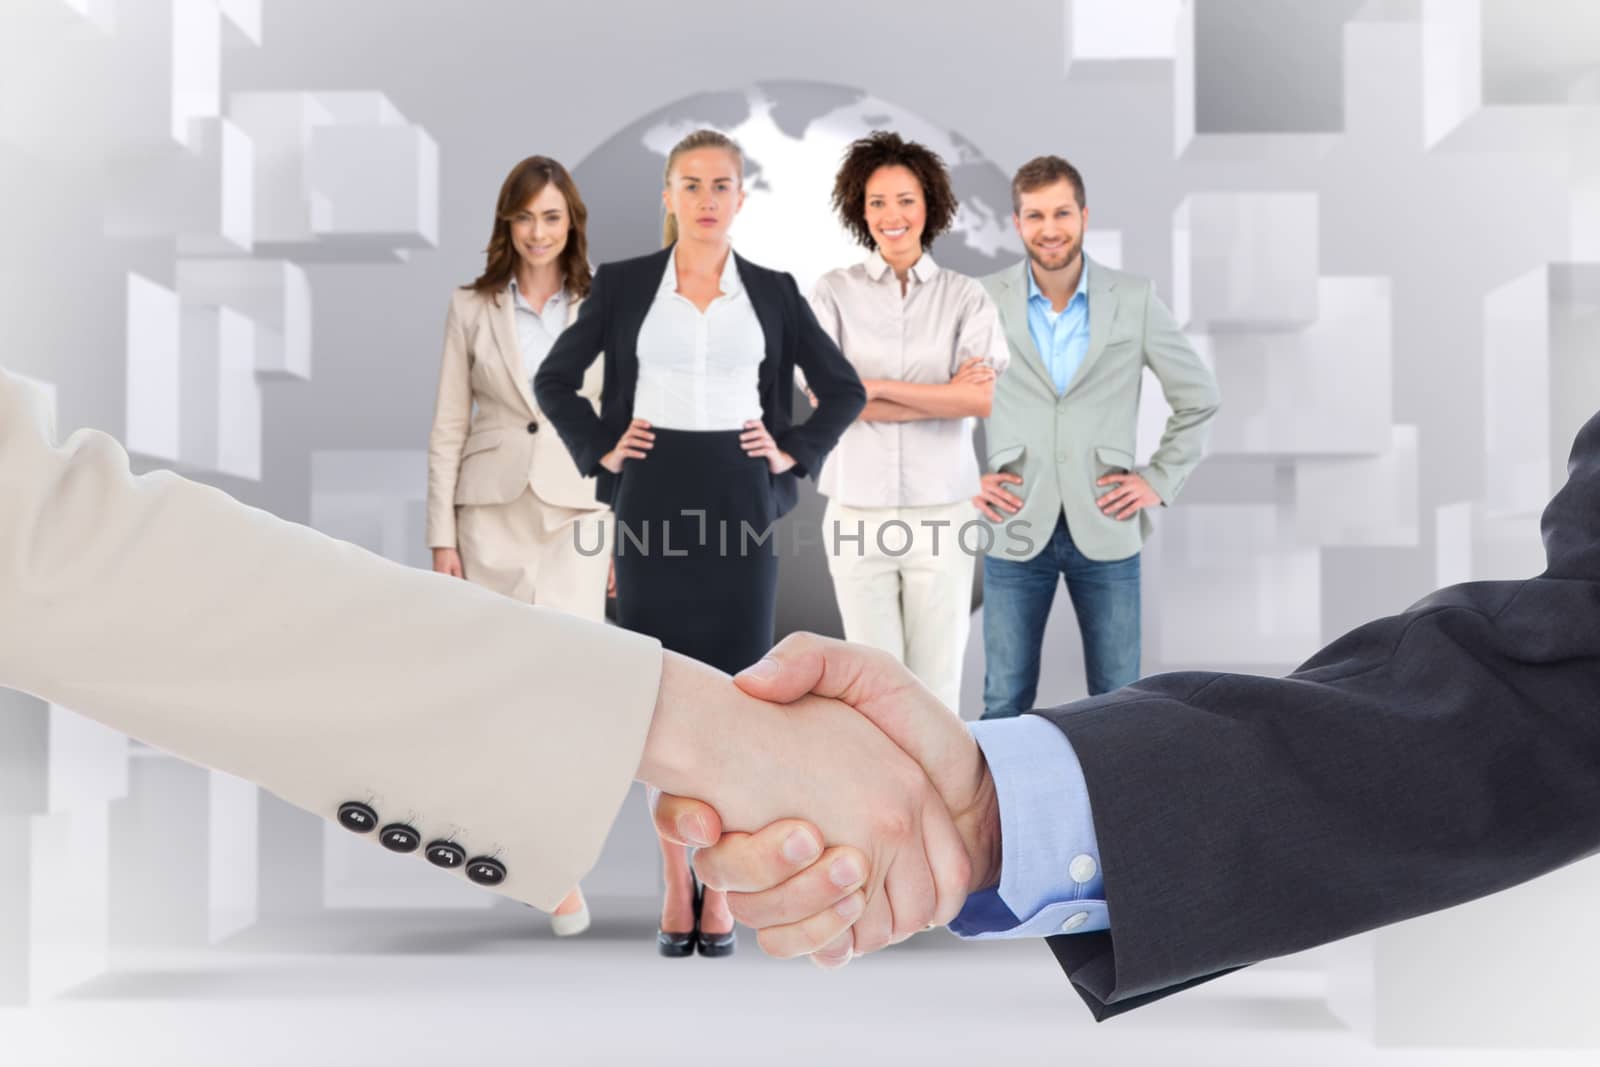 Smiling business people shaking hands while looking at the camera against planet on grey background with cubes